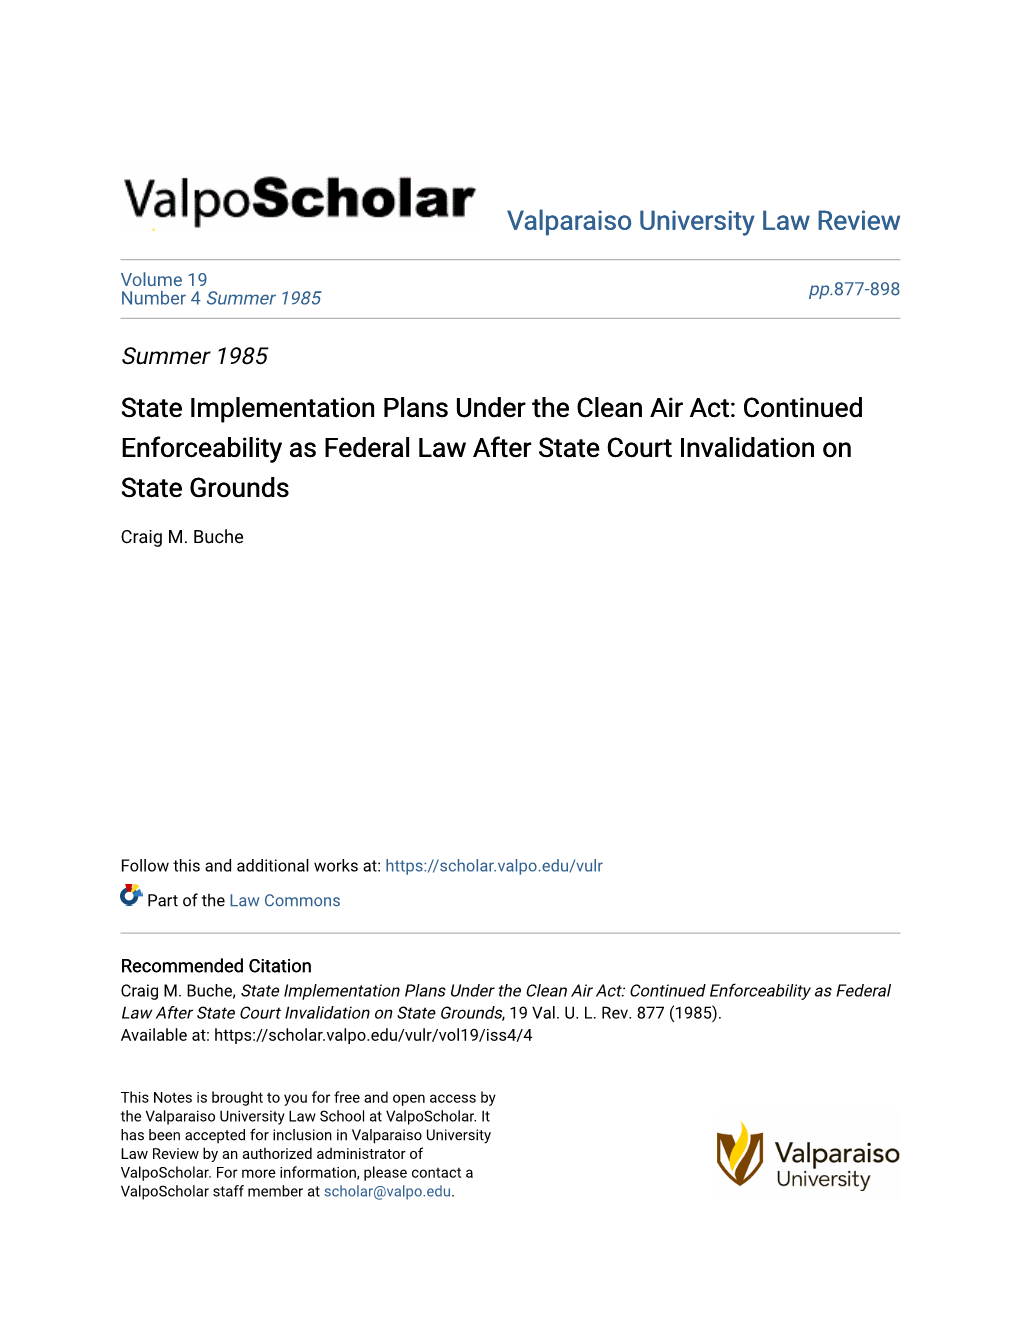 State Implementation Plans Under the Clean Air Act: Continued Enforceability As Federal Law After State Court Invalidation on State Grounds